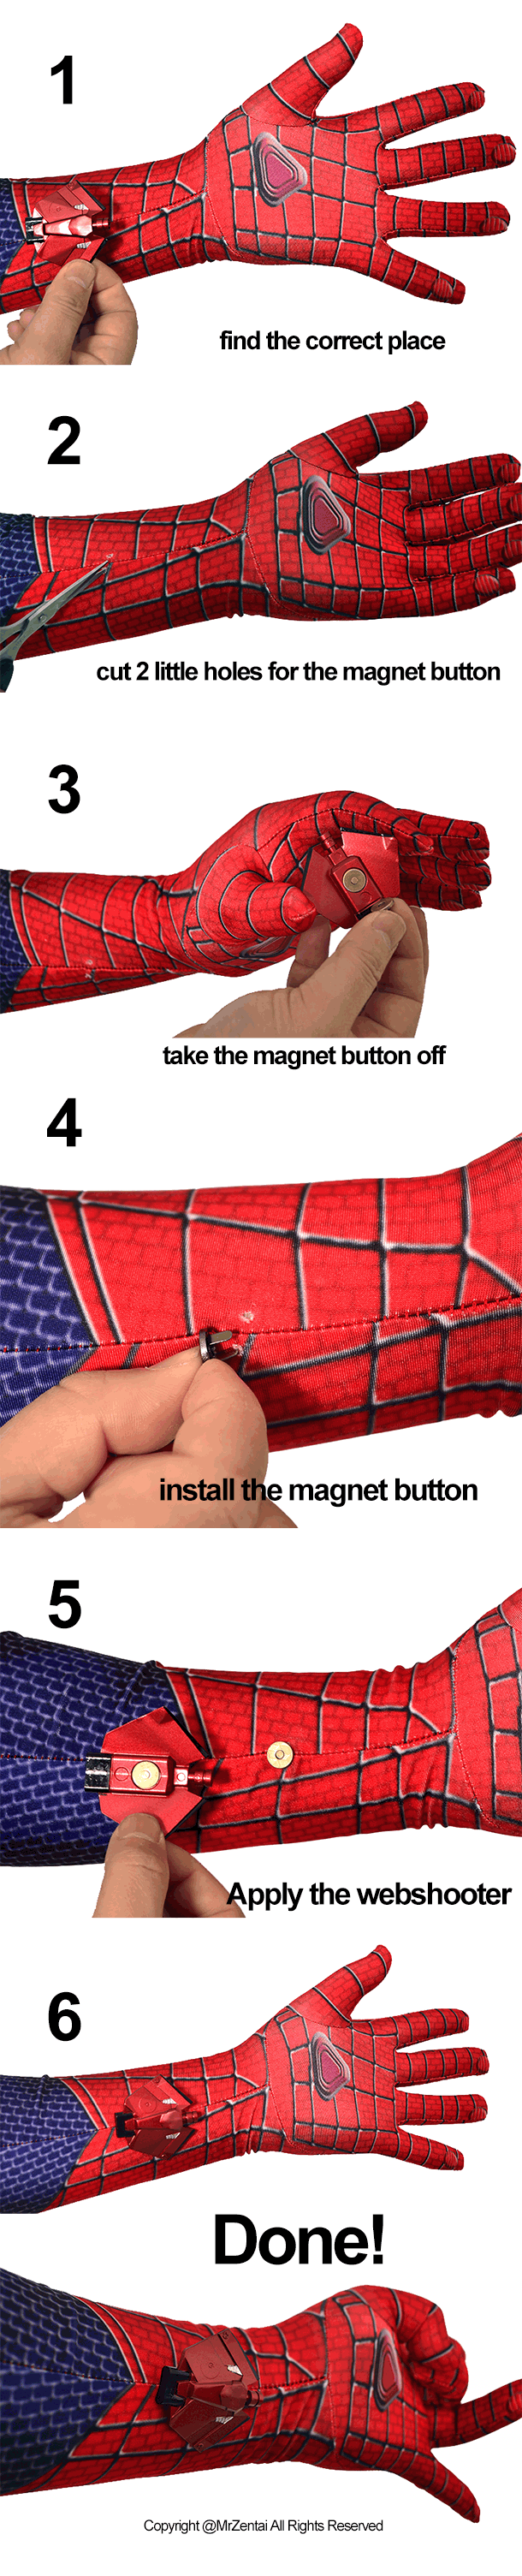 How to intall magnet spiderman webshooters